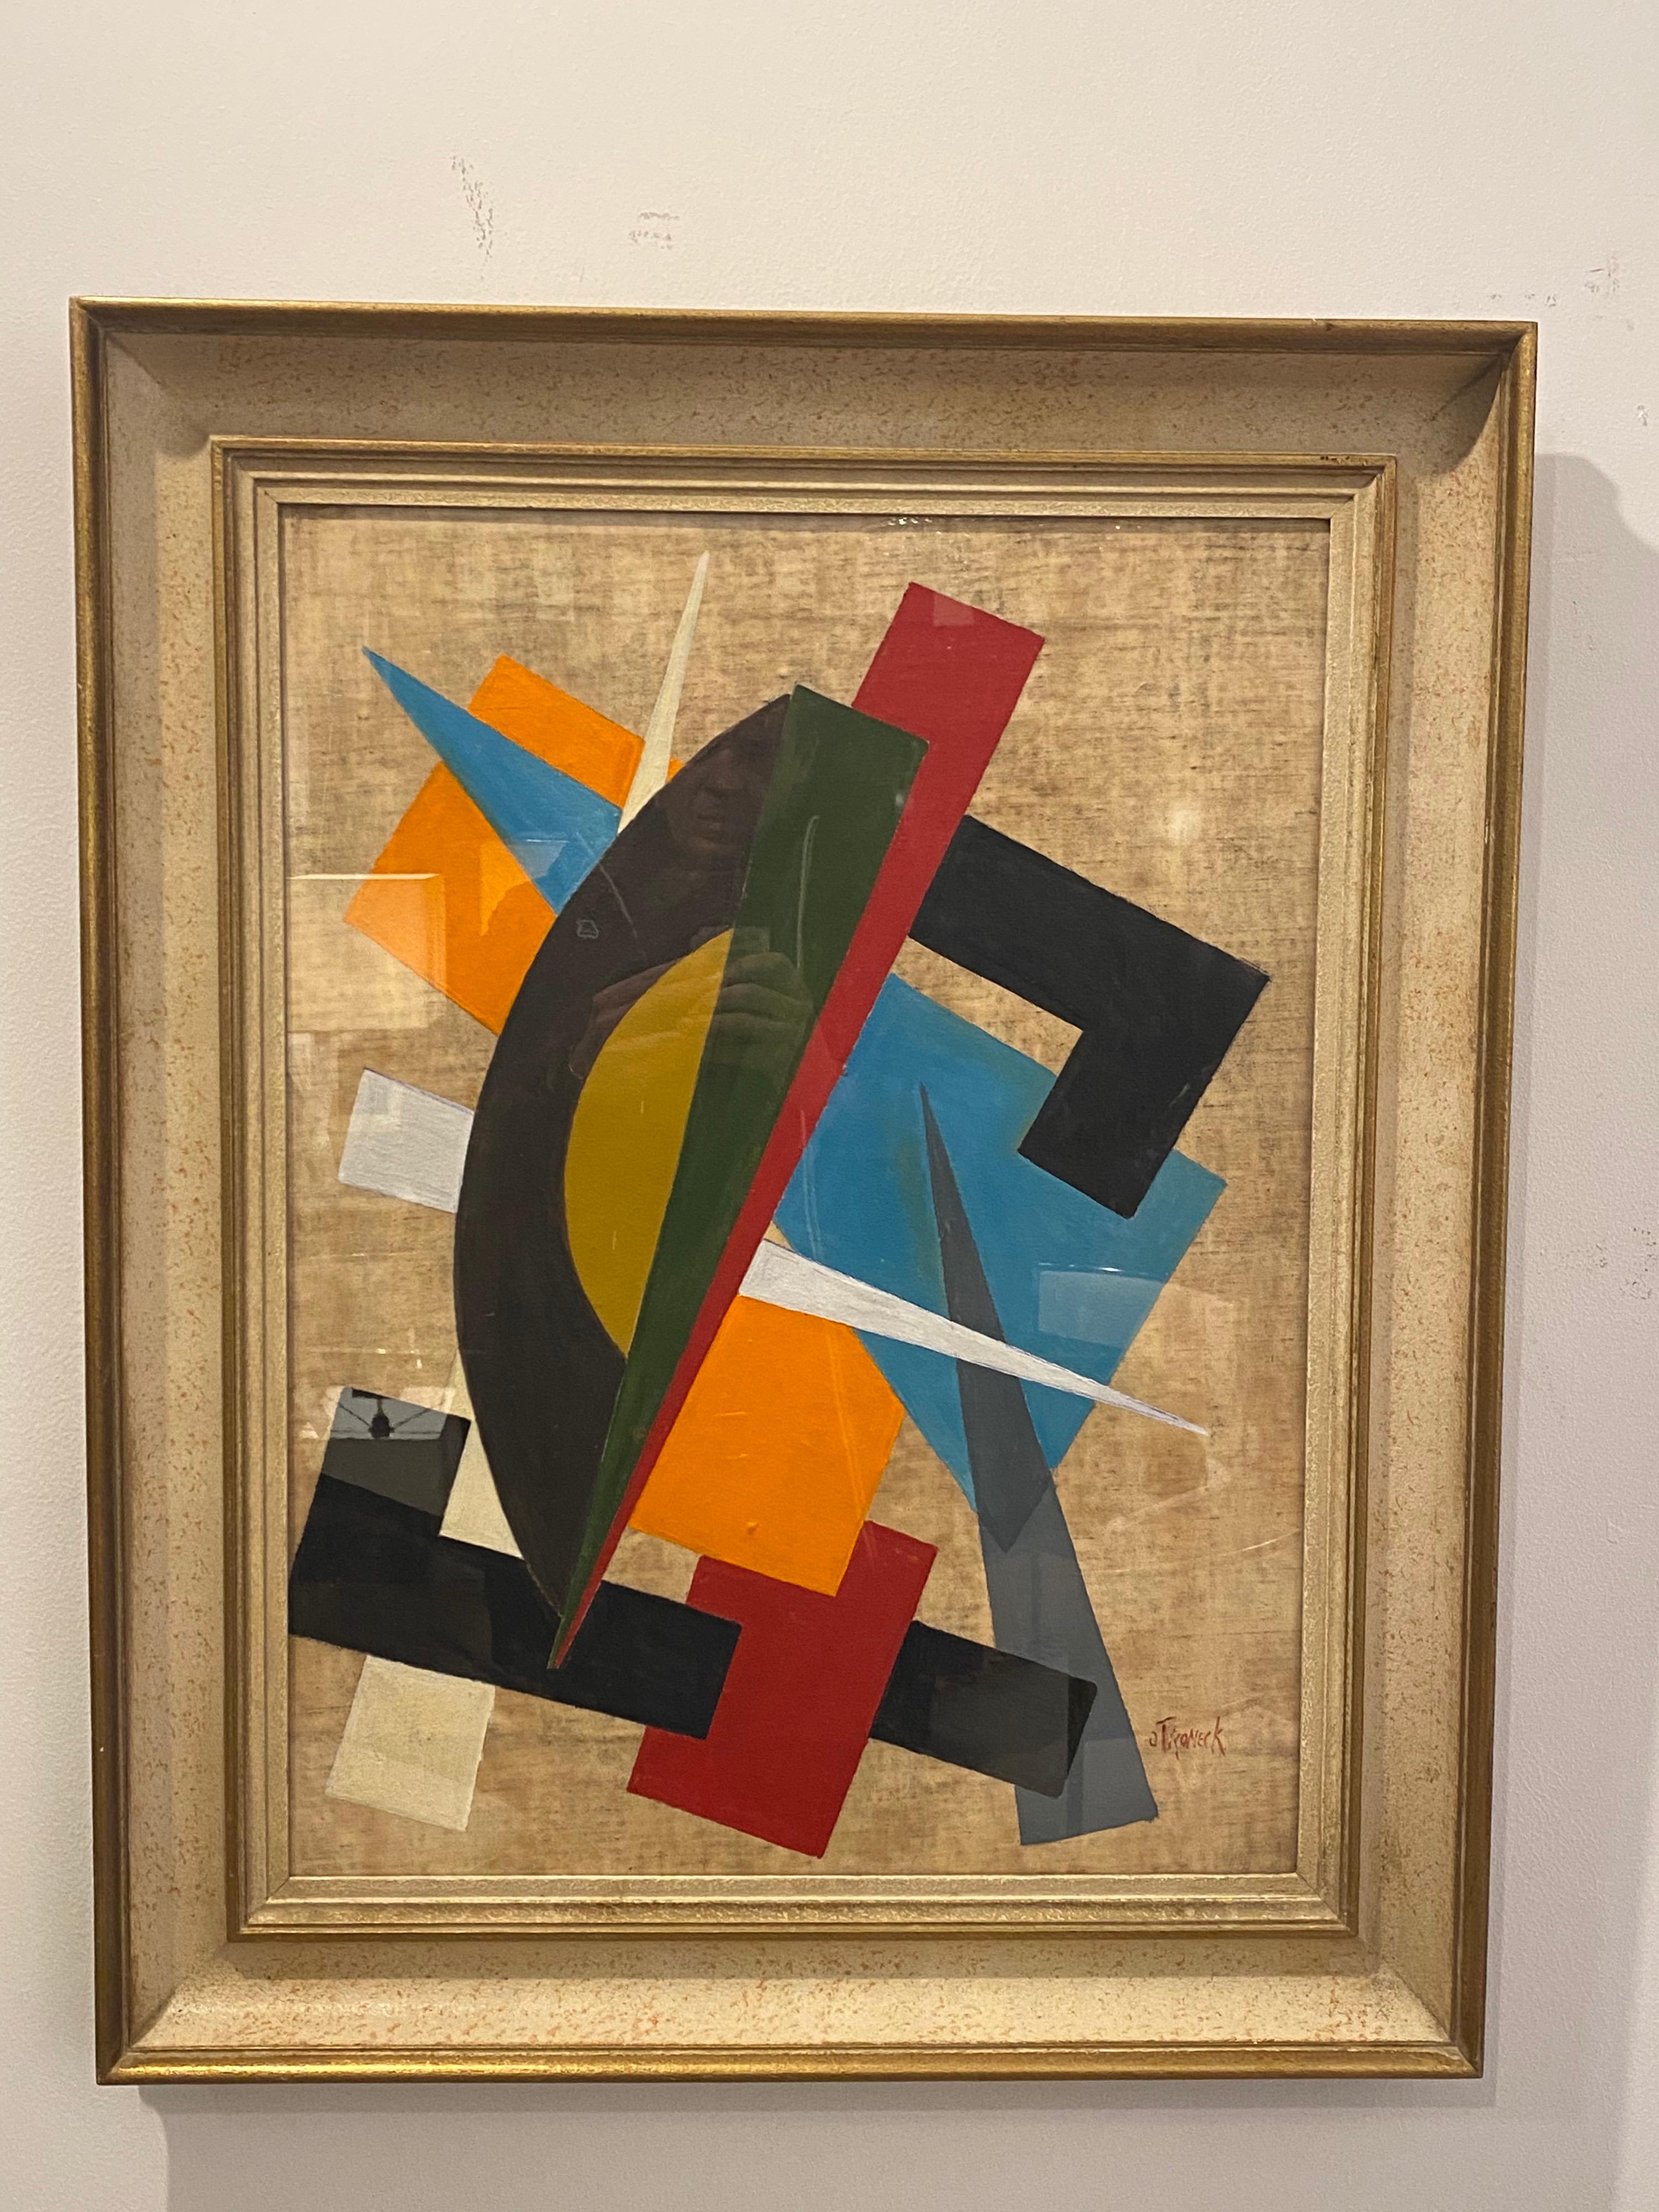 Oscar Troneck constructivism oil on canvas.
Original wood frame with gold finished and glass, circa 1960-1970
Good vintage condition.